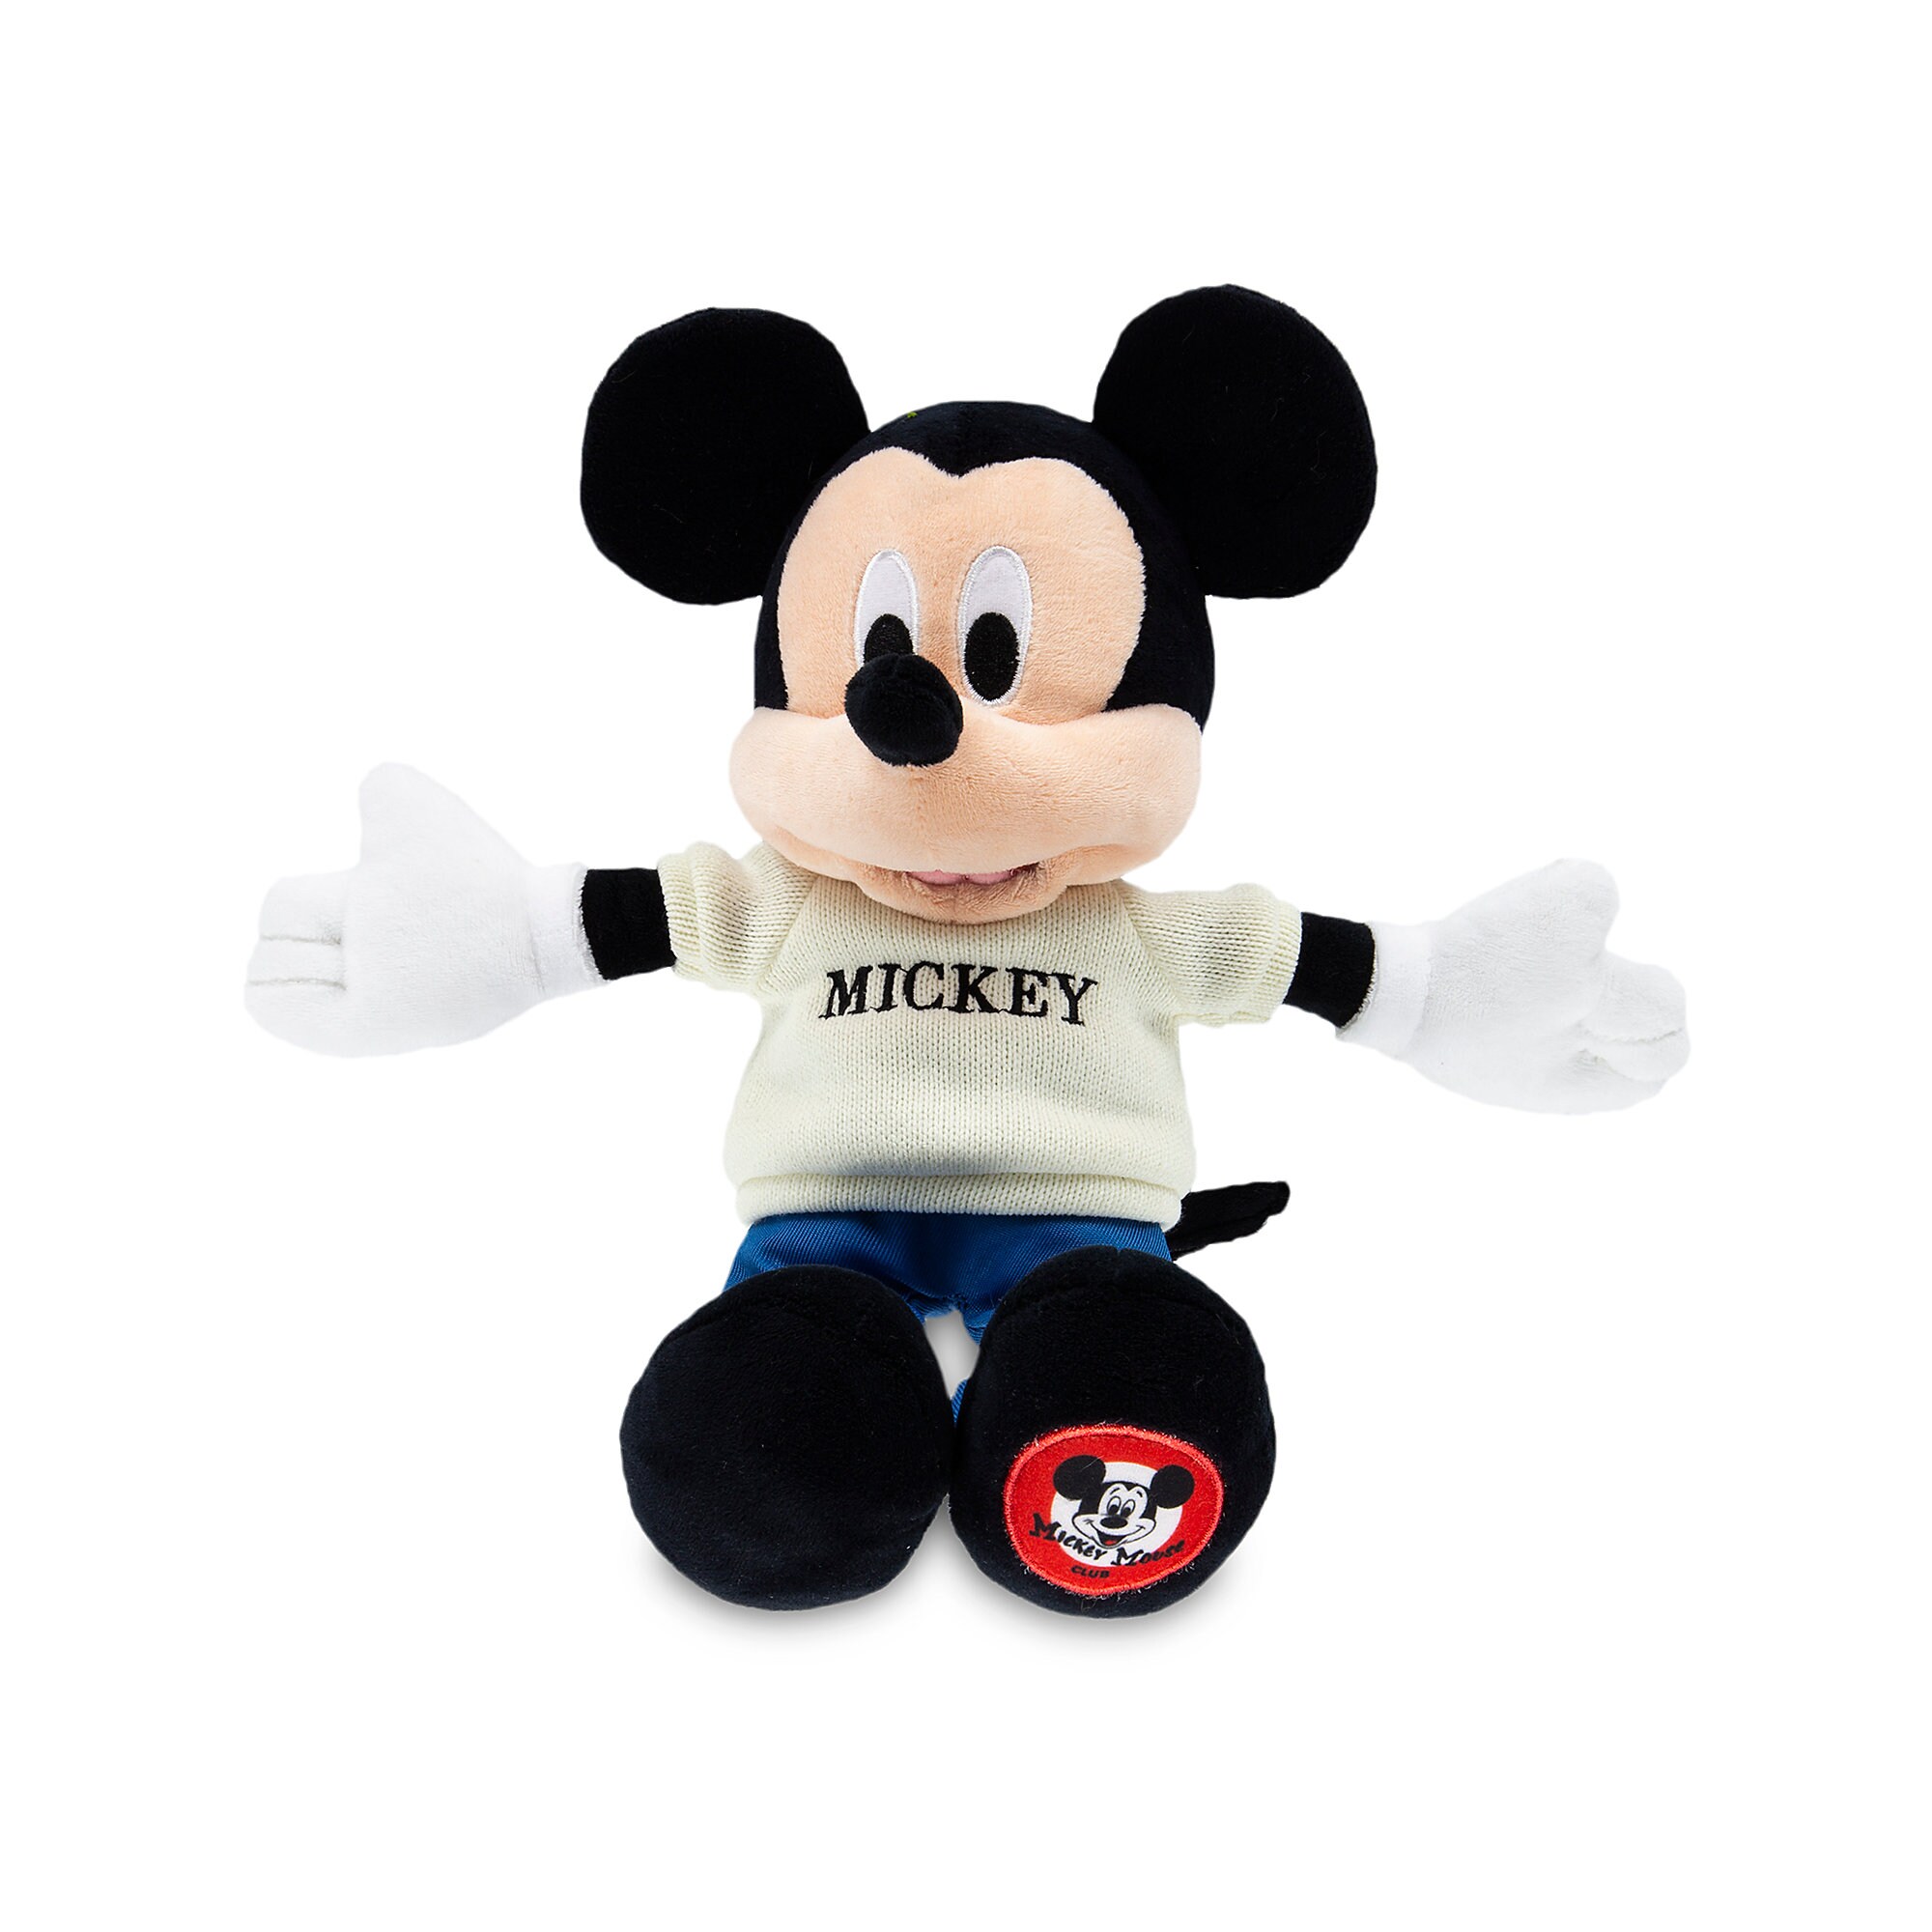 Mickey Mouse Plush - The Mickey Mouse Club - Small